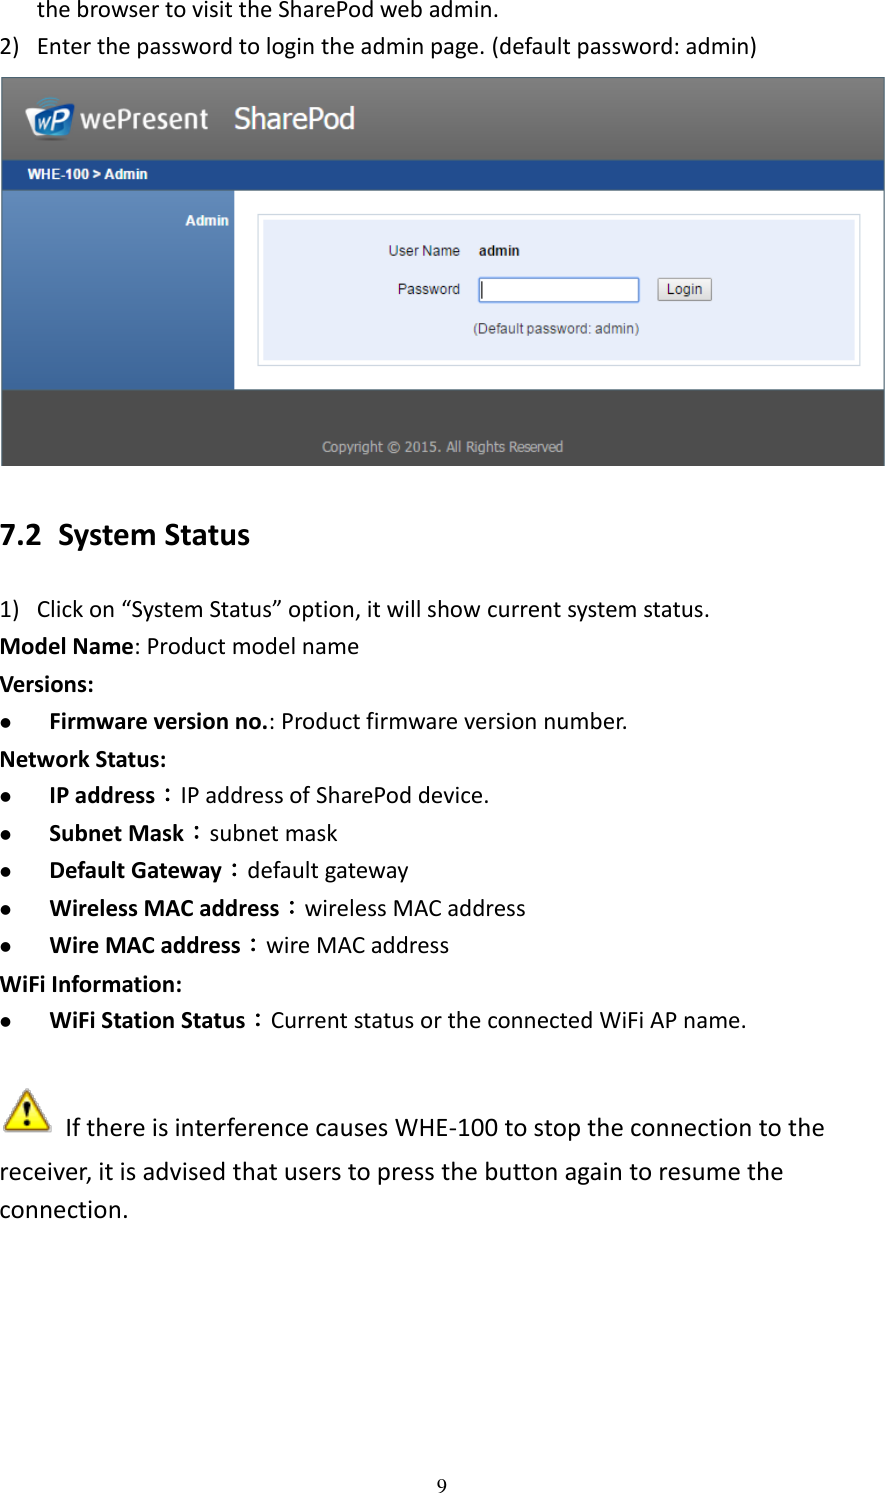   9 the browser to visit the SharePod web admin.   2) Enter the password to login the admin page. (default password: admin)  7.2 System Status 1) Click on “System Status” option, it will show current system status. Model Name: Product model name Versions:    Firmware version no.: Product firmware version number. Network Status:  IP address：IP address of SharePod device.  Subnet Mask：subnet mask  Default Gateway：default gateway  Wireless MAC address：wireless MAC address  Wire MAC address：wire MAC address WiFi Information:  WiFi Station Status：Current status or the connected WiFi AP name.   If there is interference causes WHE-100 to stop the connection to the receiver, it is advised that users to press the button again to resume the connection.  